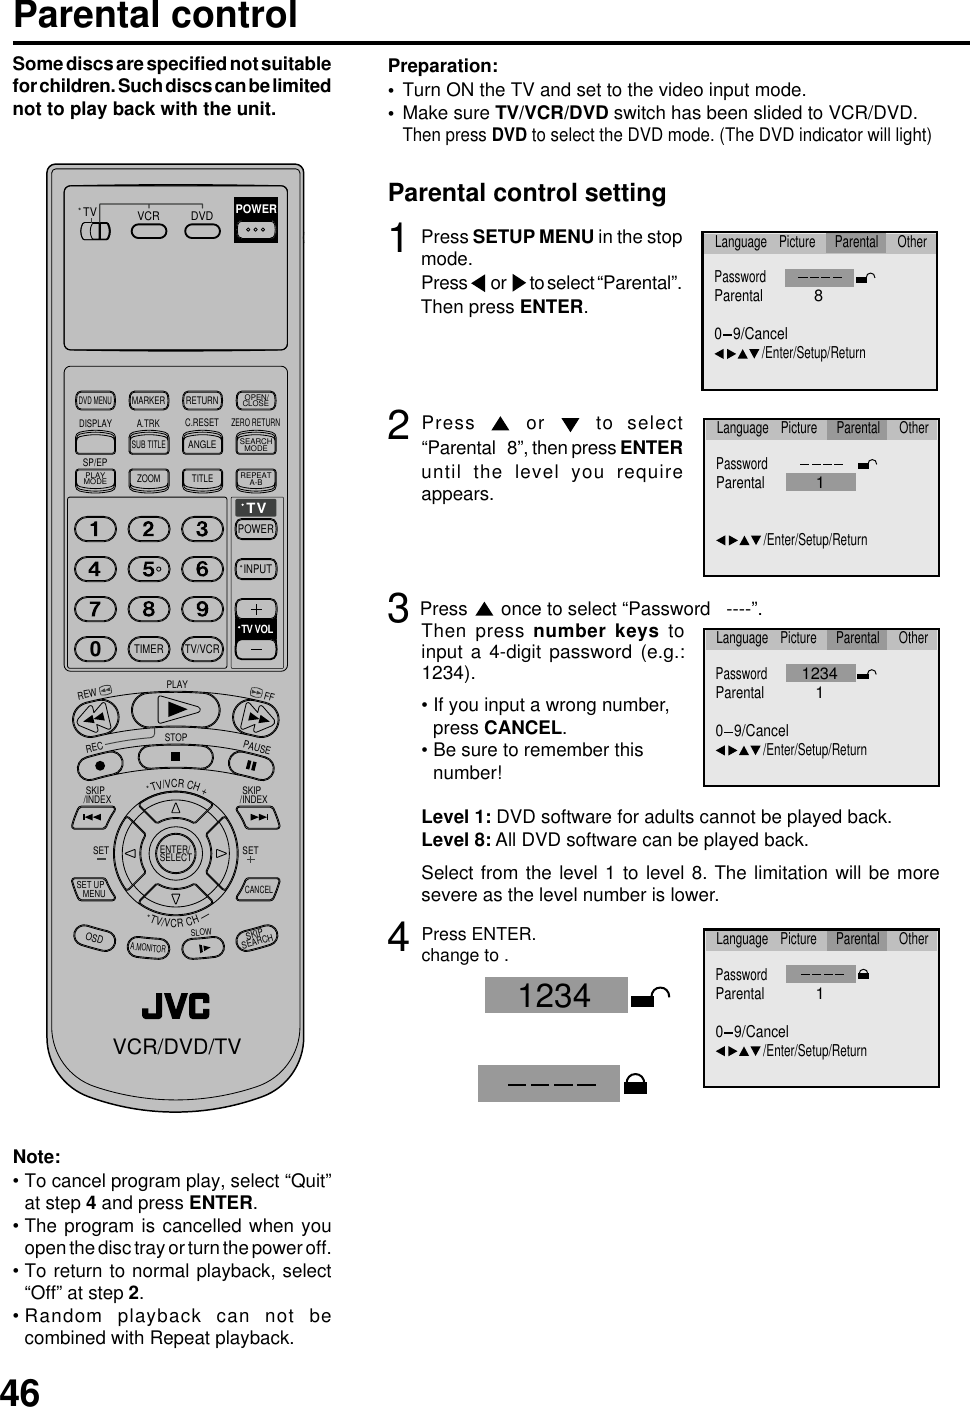 46Parental control1Press SETUP MENU in the stopmode.Press or to select “Parental”.Then press ENTER.2Press   or   to select“Parental   8”, then press ENTERuntil the level you requireappears.3Press   once to select “Password   ----”.4Press ENTER.change to .Parental control settingTurn ON the TV and set to the video input mode.Make sure TV/VCR/DVD switch has been slided to VCR/DVD.Then press DVD to select the DVD mode. (The DVD indicator will light)Preparation:••Note:To cancel program play, select “Quit”at step 4 and press ENTER.The program is cancelled when youopen the disc tray or turn the power off.To return to normal playback, select“Off” at step 2.Random playback can not becombined with Repeat playback.••••• If you input a wrong number,press CANCEL.• Be sure to remember thisnumber!Some discs are specified not suitablefor children. Such discs can be limitednot to play back with the unit.Level 1: DVD software for adults cannot be played back.Level 8: All DVD software can be played back.Select from the level 1 to level 8. The limitation will be moresevere as the level number is lower.Then press number keys toinput a 4-digit password (e.g.:1234).PasswordParental1/Enter/Setup/ReturnLanguage Picture Parental Other12340 9/CancelPasswordParental1/Enter/Setup/ReturnLanguage Picture Parental OtherPasswordParental80 9/Cancel/Enter/Setup/ReturnLanguage Picture Parental OtherPasswordParental1/Enter/Setup/ReturnLanguage Picture Parental Other0 9/Cancel1234TV/VCRCH+TV VCR DVDPOWERDVD MENUMARKER RETURNOPEN/CLOSEDISPLAY A.TRK C.RESETZERO RETURNSUB TITLEANGLESEARCHMODESP/EPPLAYMODEZOOM TITLEREPEATA-BTVPOWERINPUTTV VOL0TIMER TV/VCRREWPLAYFFRECSTOPPAUSE SKIP/INDEX  SKIP/INDEXTV/VCRCH—SET SETENTER/SELECTSET UP   MENUCANCELOSDA.MONITORSLOWSKIP SEARCHVCR/DVD/TV